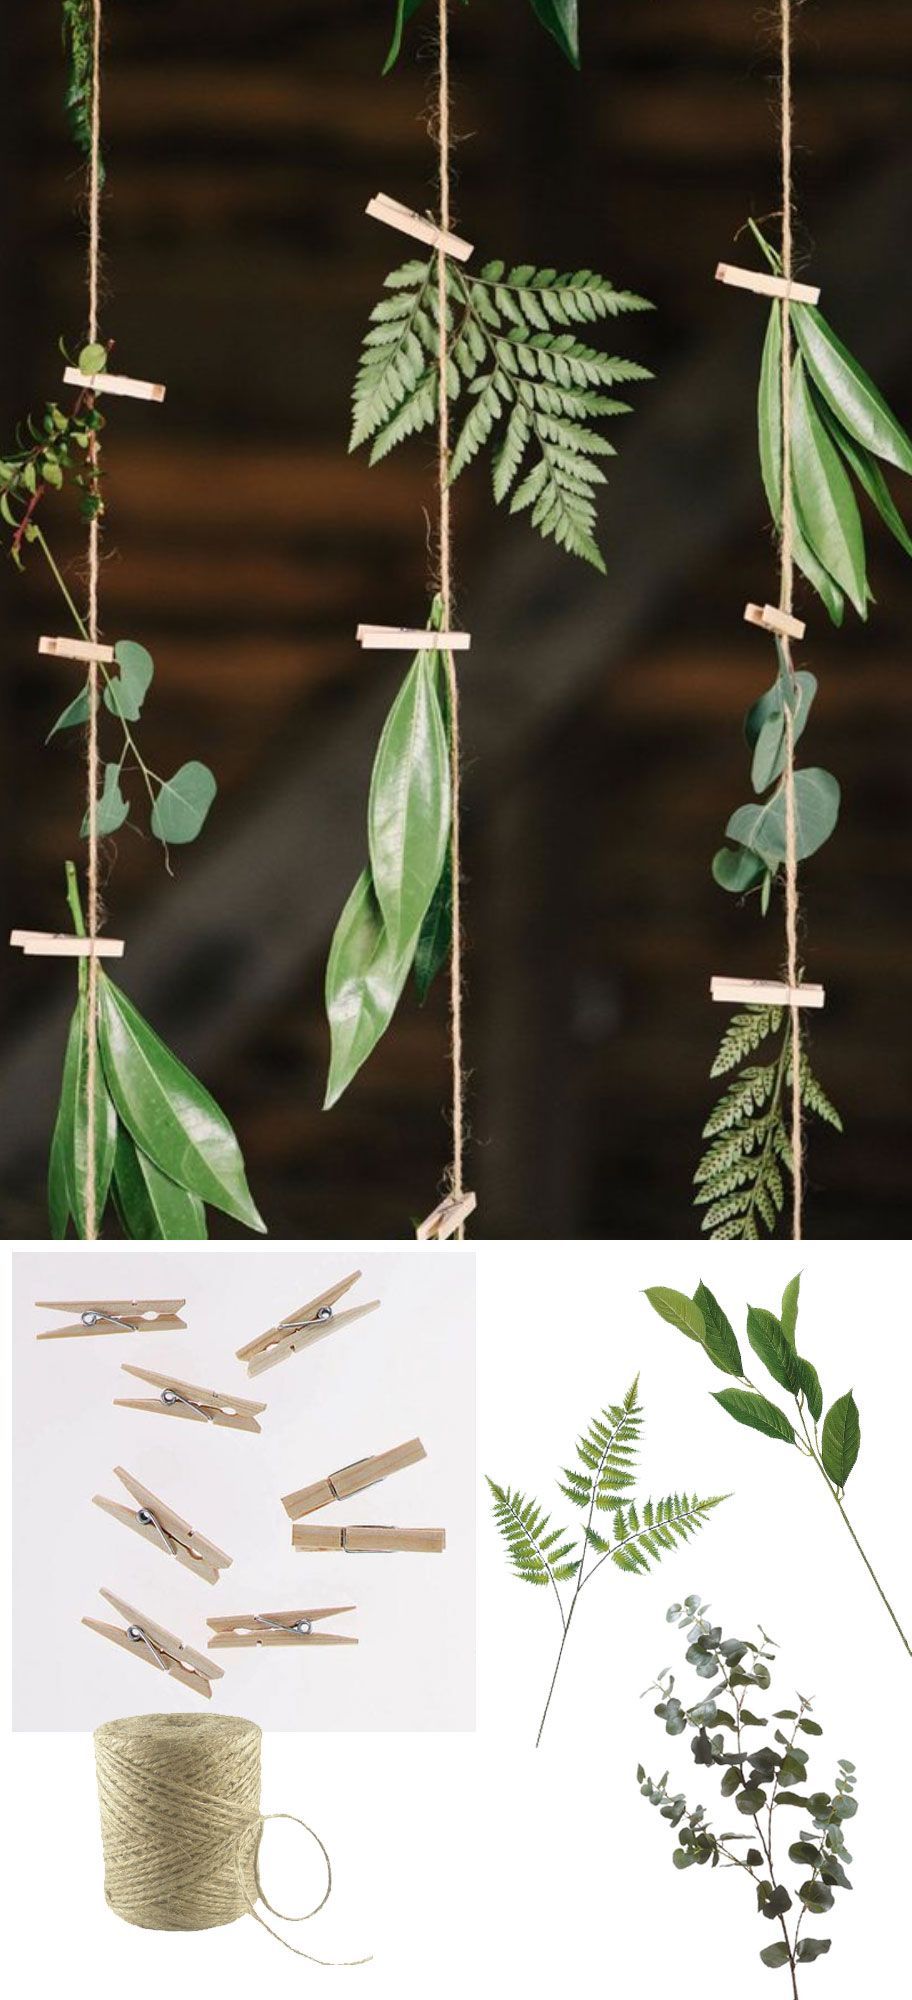 DIY greenery hanging backdrop with twine, clothespins, and faux greenery from afloral.com #diywedding Photo Inspiration Via